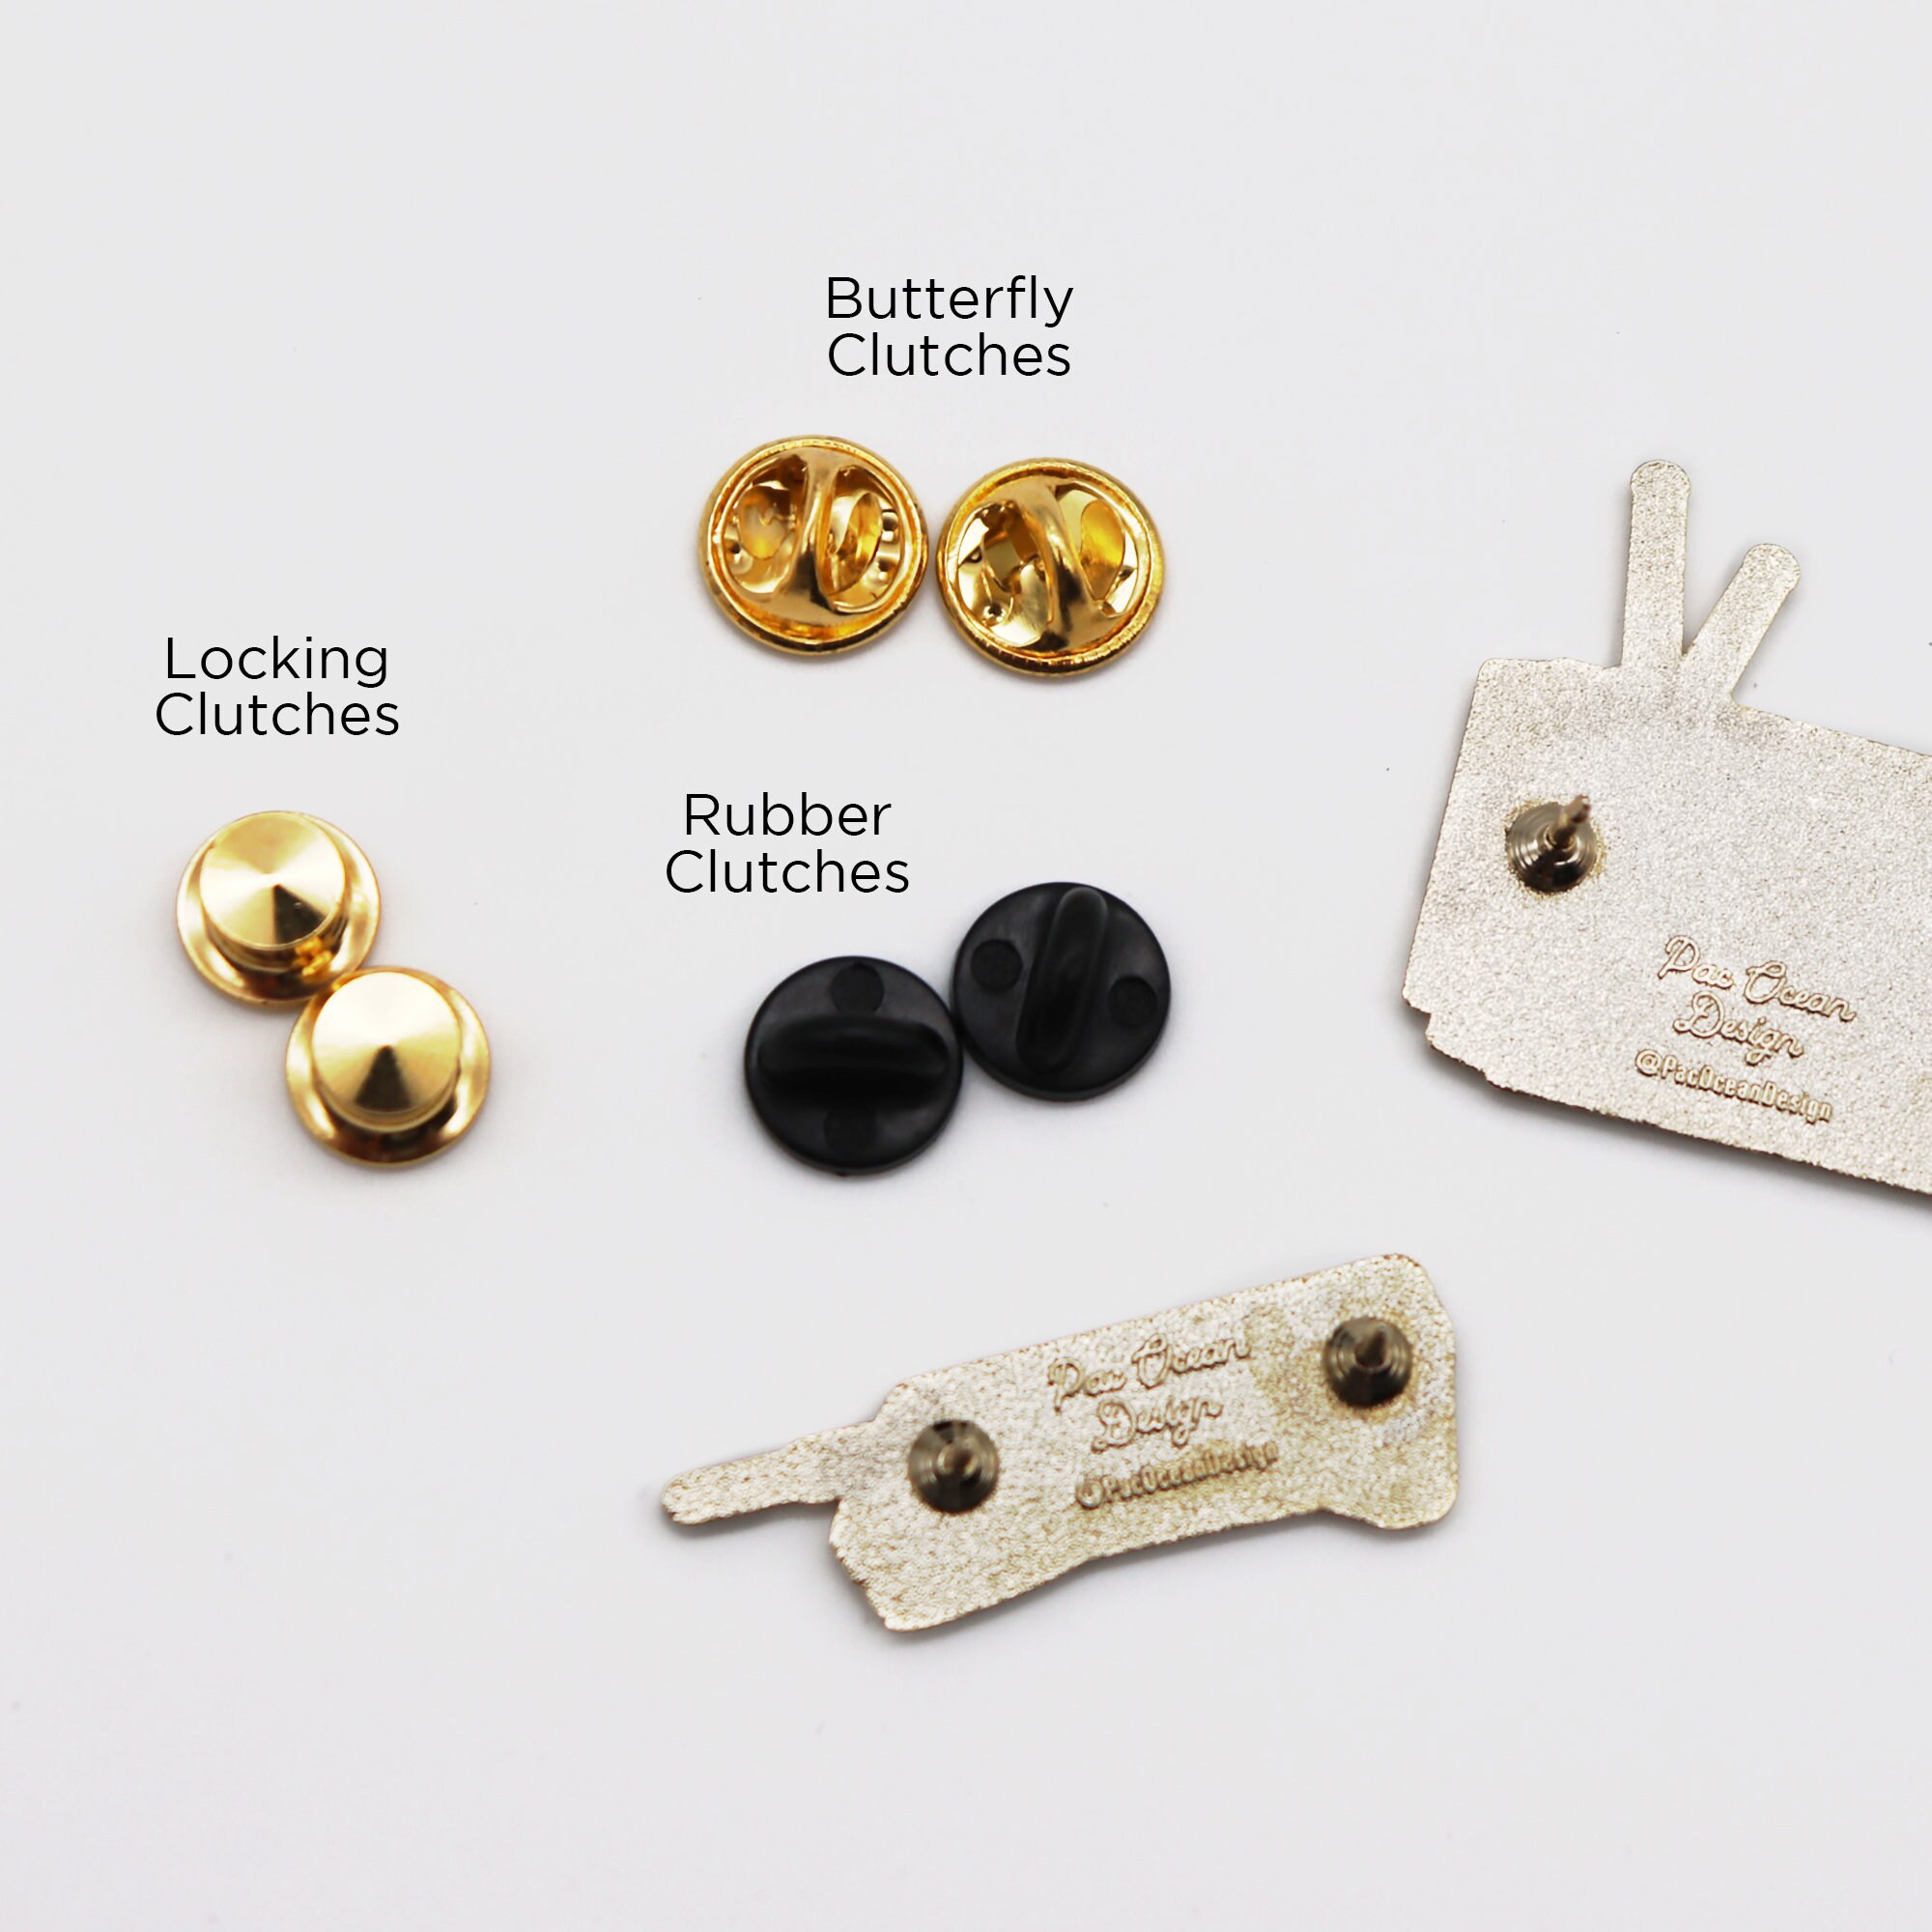 Custom Pins 101: Types of Pin Backs and Attachments